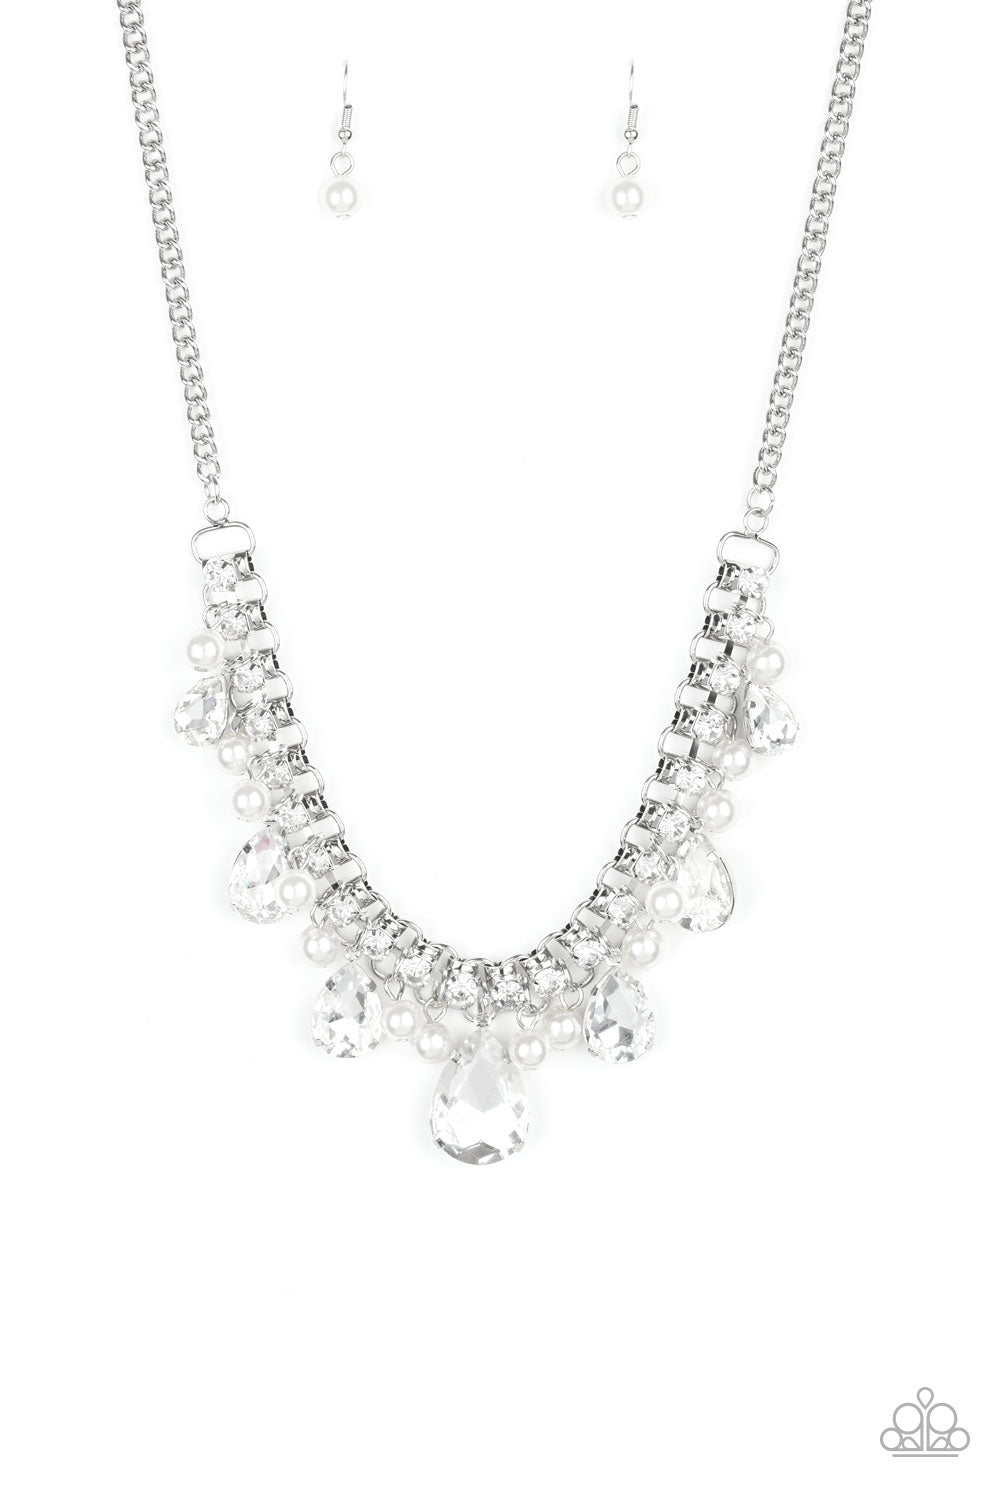 Paparazzi Accessories - Knockout Queen - White Necklace